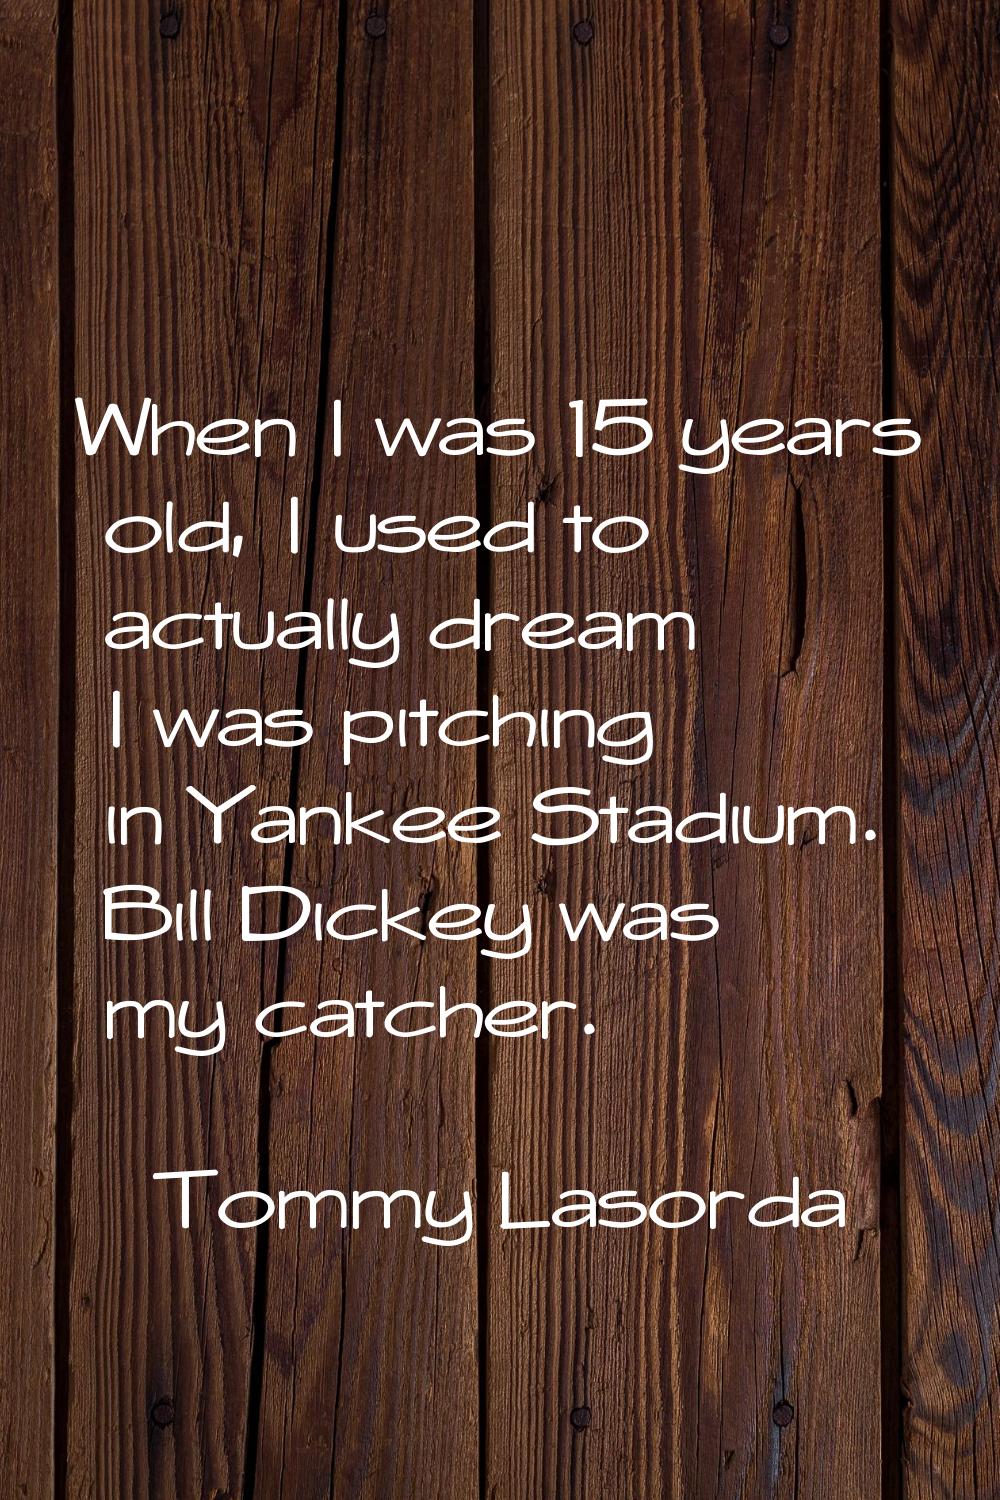 When I was 15 years old, I used to actually dream I was pitching in Yankee Stadium. Bill Dickey was